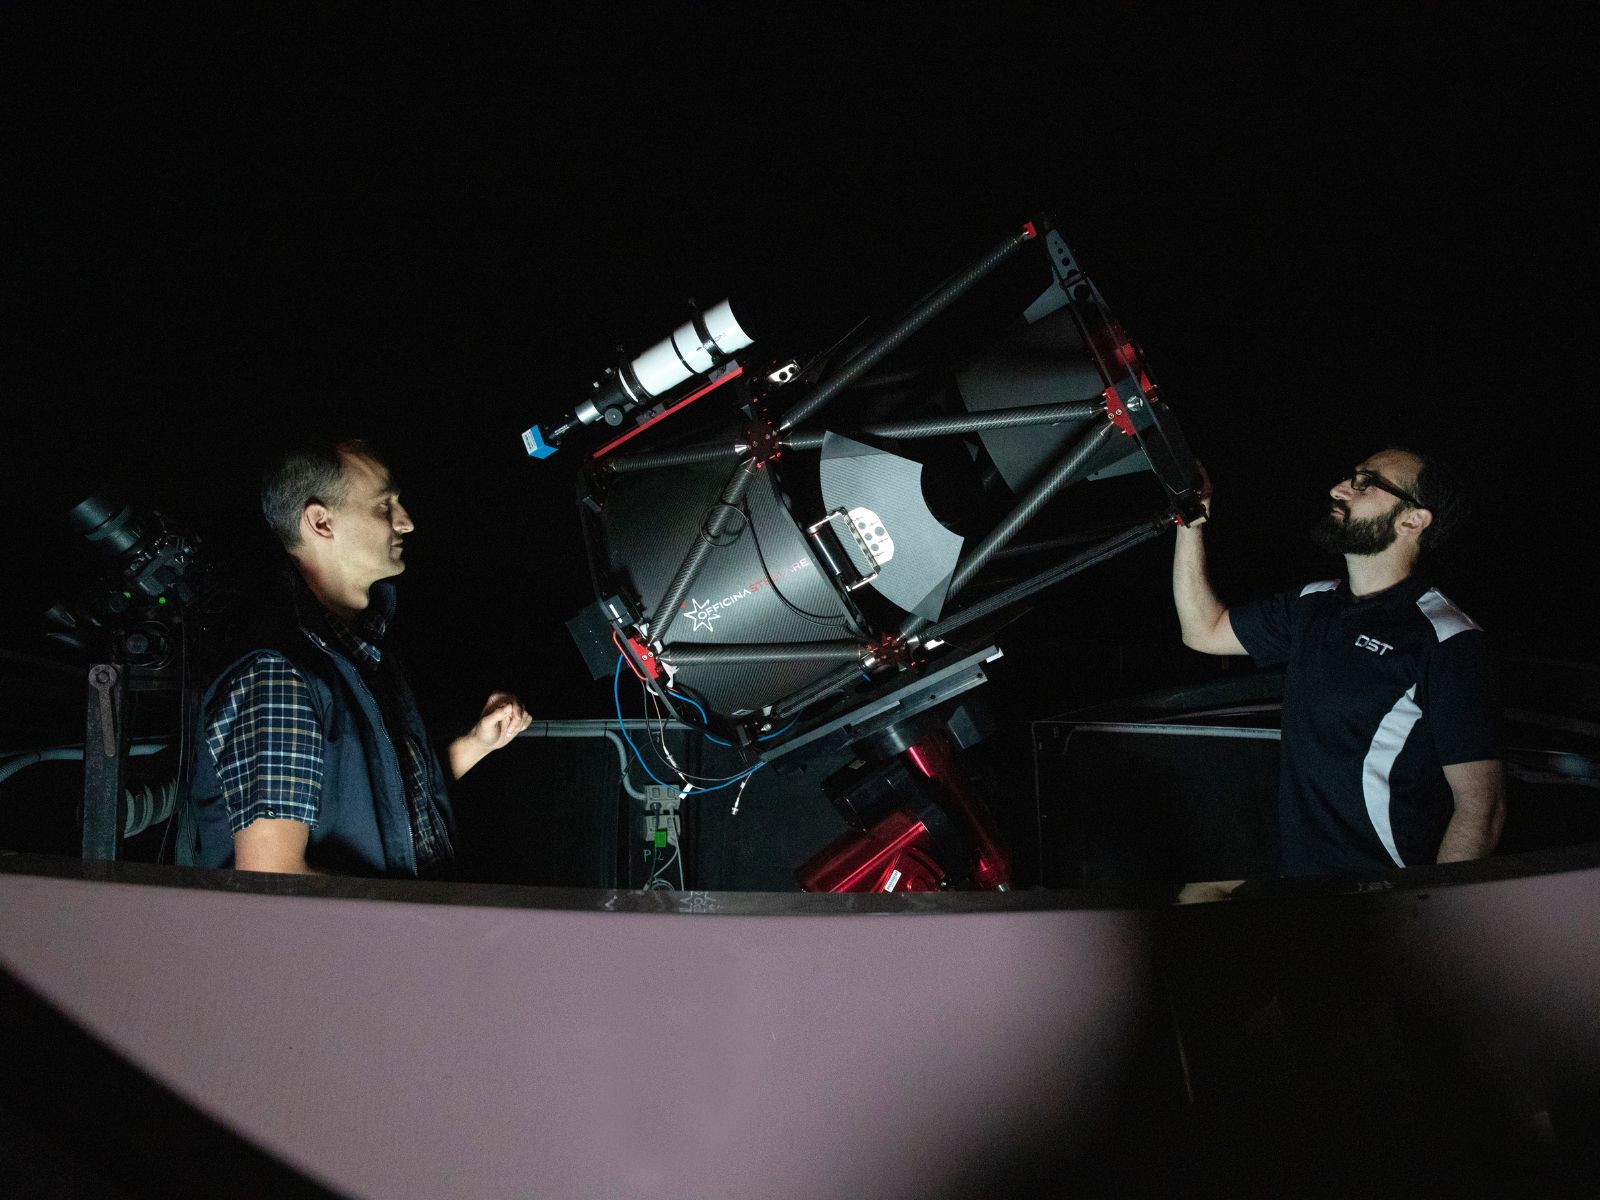 Researchers preparing the DSTG Space Domain Awareness (SDA) Telescope for collecting observations of satellites and debris in orbit around Earth, in preparation for a Sprint Advanced Concept Training exercise. The research instruments allow training, testing of new hardware, algorithm development and collaborative research with industry, academia and research organisations in Australia and overseas.